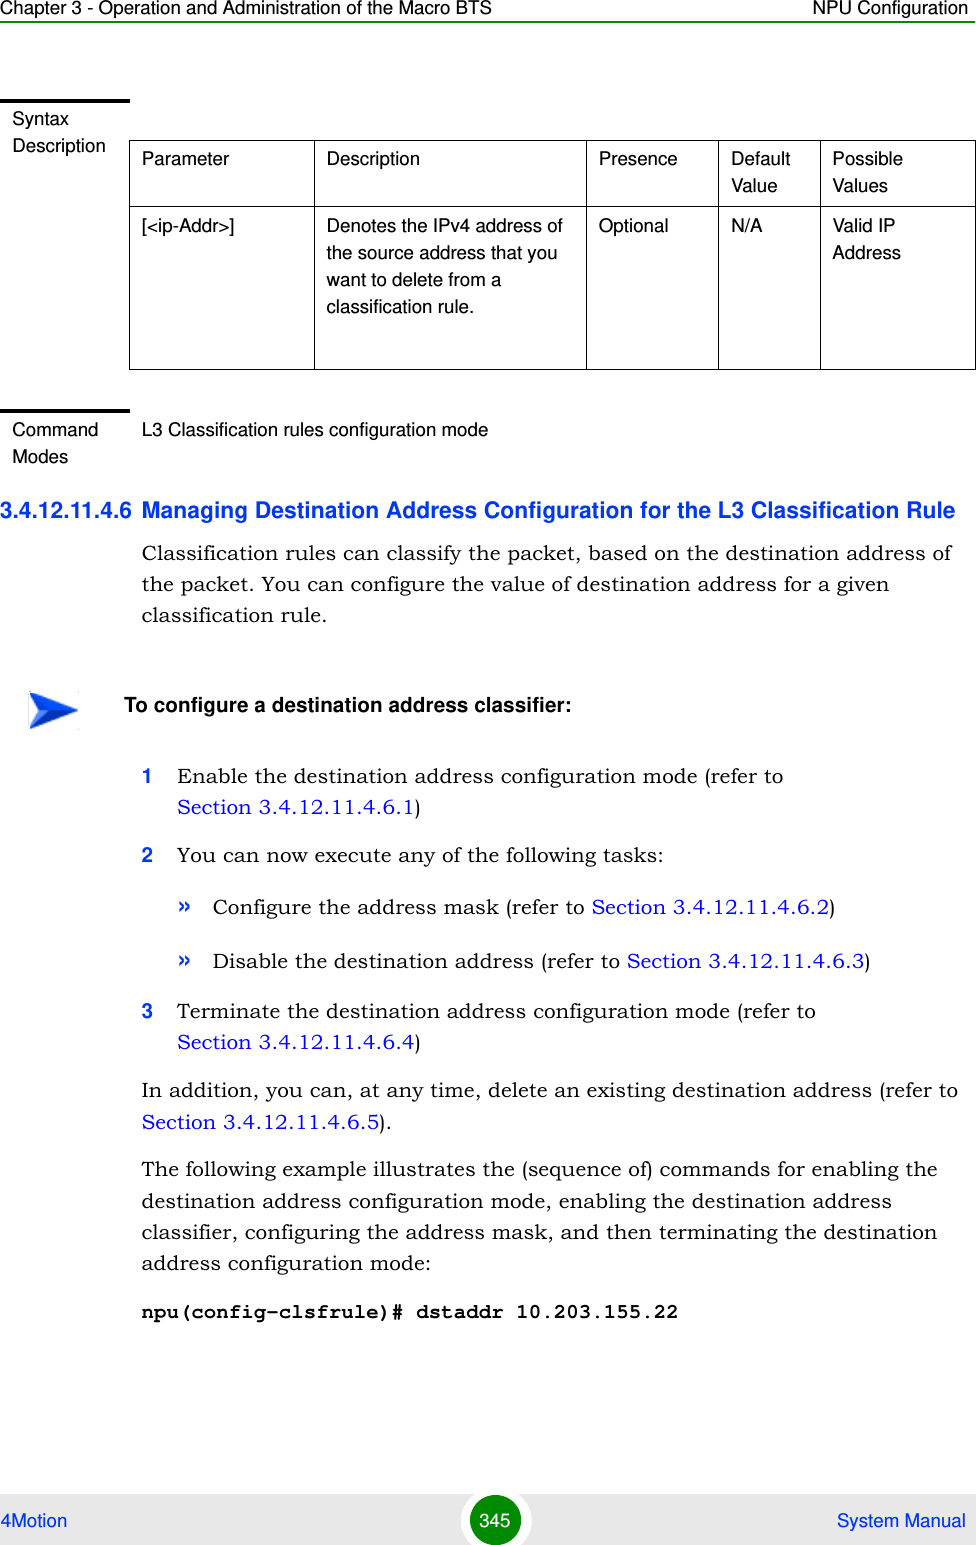 Chapter 3 - Operation and Administration of the Macro BTS NPU Configuration4Motion 345  System Manual3.4.12.11.4.6 Managing Destination Address Configuration for the L3 Classification RuleClassification rules can classify the packet, based on the destination address of the packet. You can configure the value of destination address for a given classification rule.1Enable the destination address configuration mode (refer to Section 3.4.12.11.4.6.1)2You can now execute any of the following tasks:»Configure the address mask (refer to Section 3.4.12.11.4.6.2)»Disable the destination address (refer to Section 3.4.12.11.4.6.3)3Terminate the destination address configuration mode (refer to Section 3.4.12.11.4.6.4)In addition, you can, at any time, delete an existing destination address (refer to Section 3.4.12.11.4.6.5). The following example illustrates the (sequence of) commands for enabling the destination address configuration mode, enabling the destination address classifier, configuring the address mask, and then terminating the destination address configuration mode:npu(config-clsfrule)# dstaddr 10.203.155.22Syntax Description Parameter Description Presence Default ValuePossible Values[&lt;ip-Addr&gt;] Denotes the IPv4 address of the source address that you want to delete from a classification rule. Optional N/A Valid IP AddressCommand ModesL3 Classification rules configuration modeTo configure a destination address classifier: